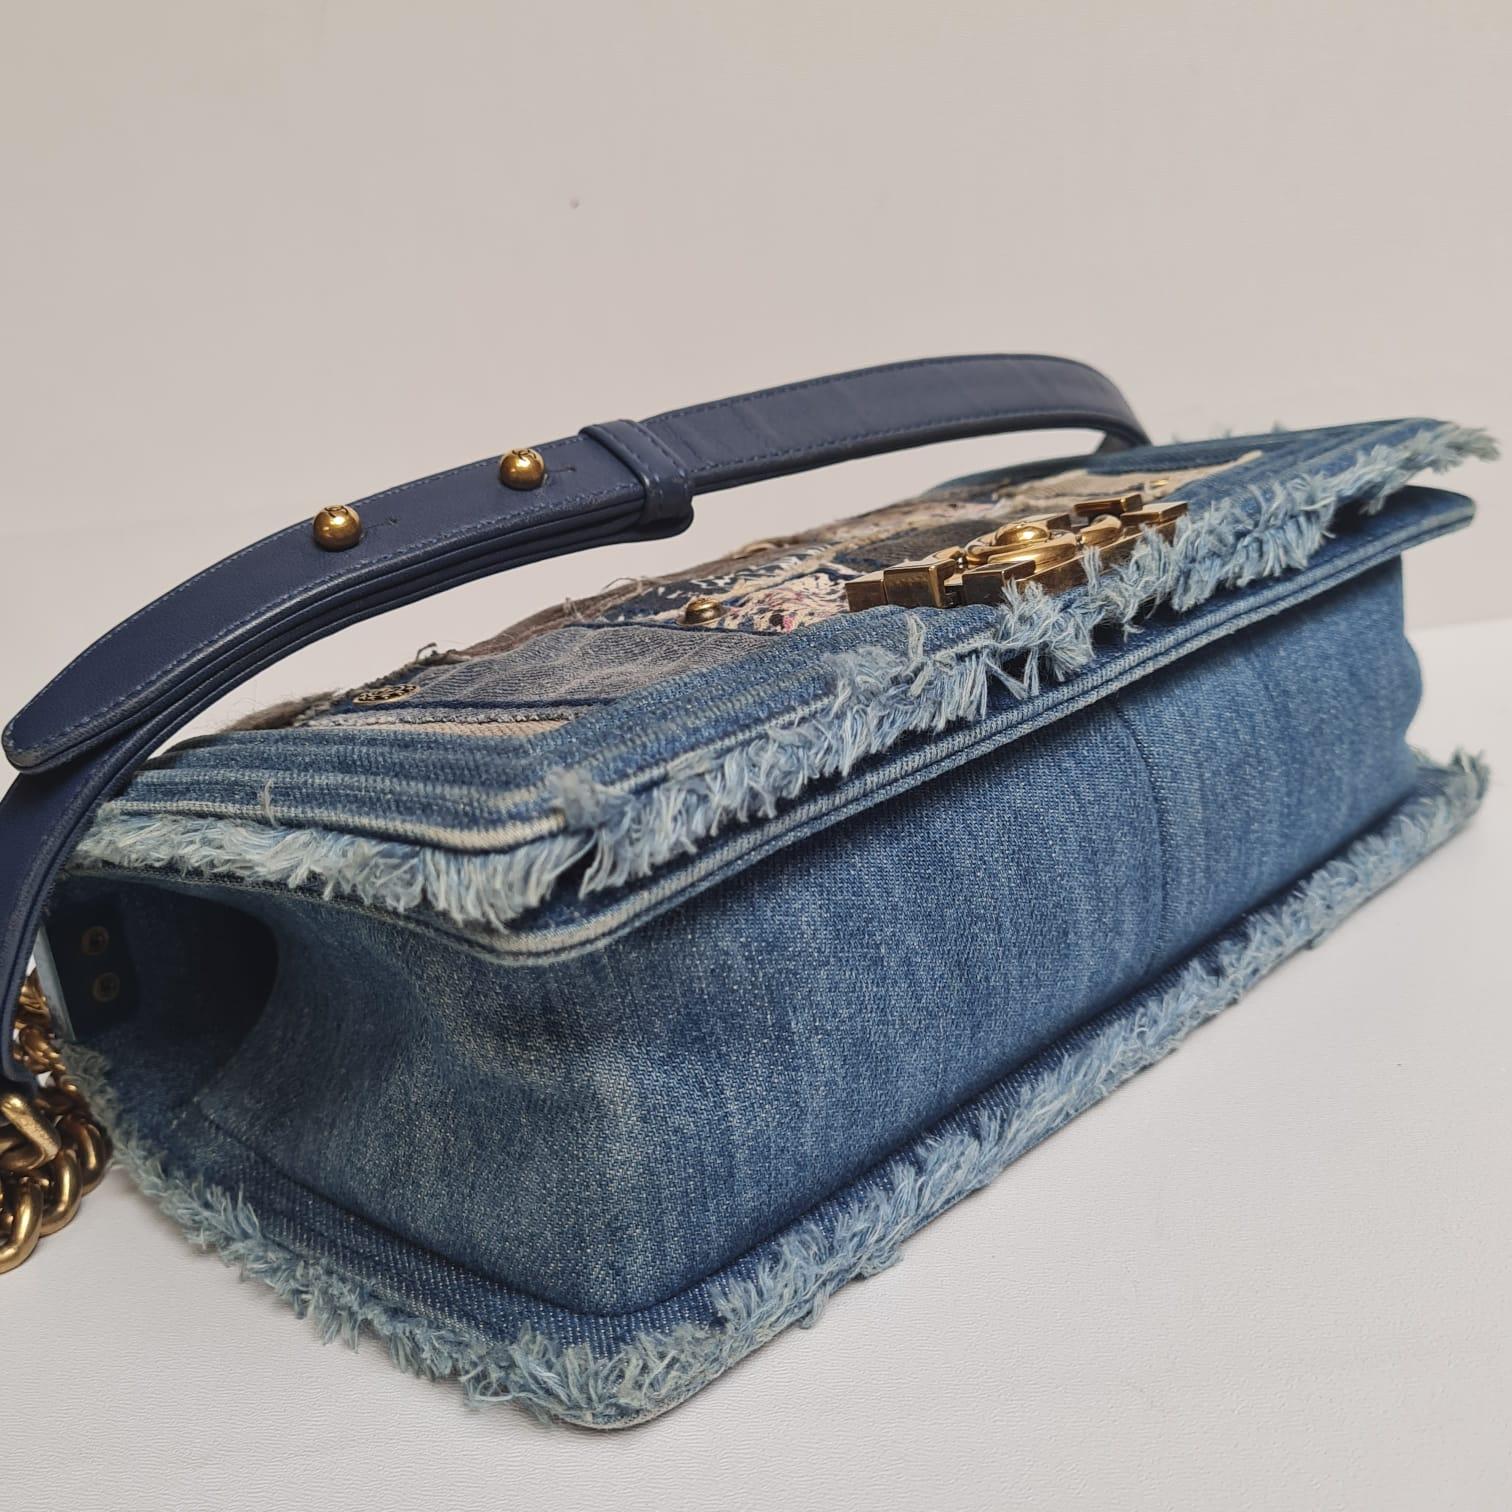 A rare boy bag in denim patchwork ensemble. Perfect bag to add to your collection. Item has been professionally cleaned, with minor scuff marks on the corners due to wear. Light wrinkling on some suede patchwork detail. Missing one emblem hardware